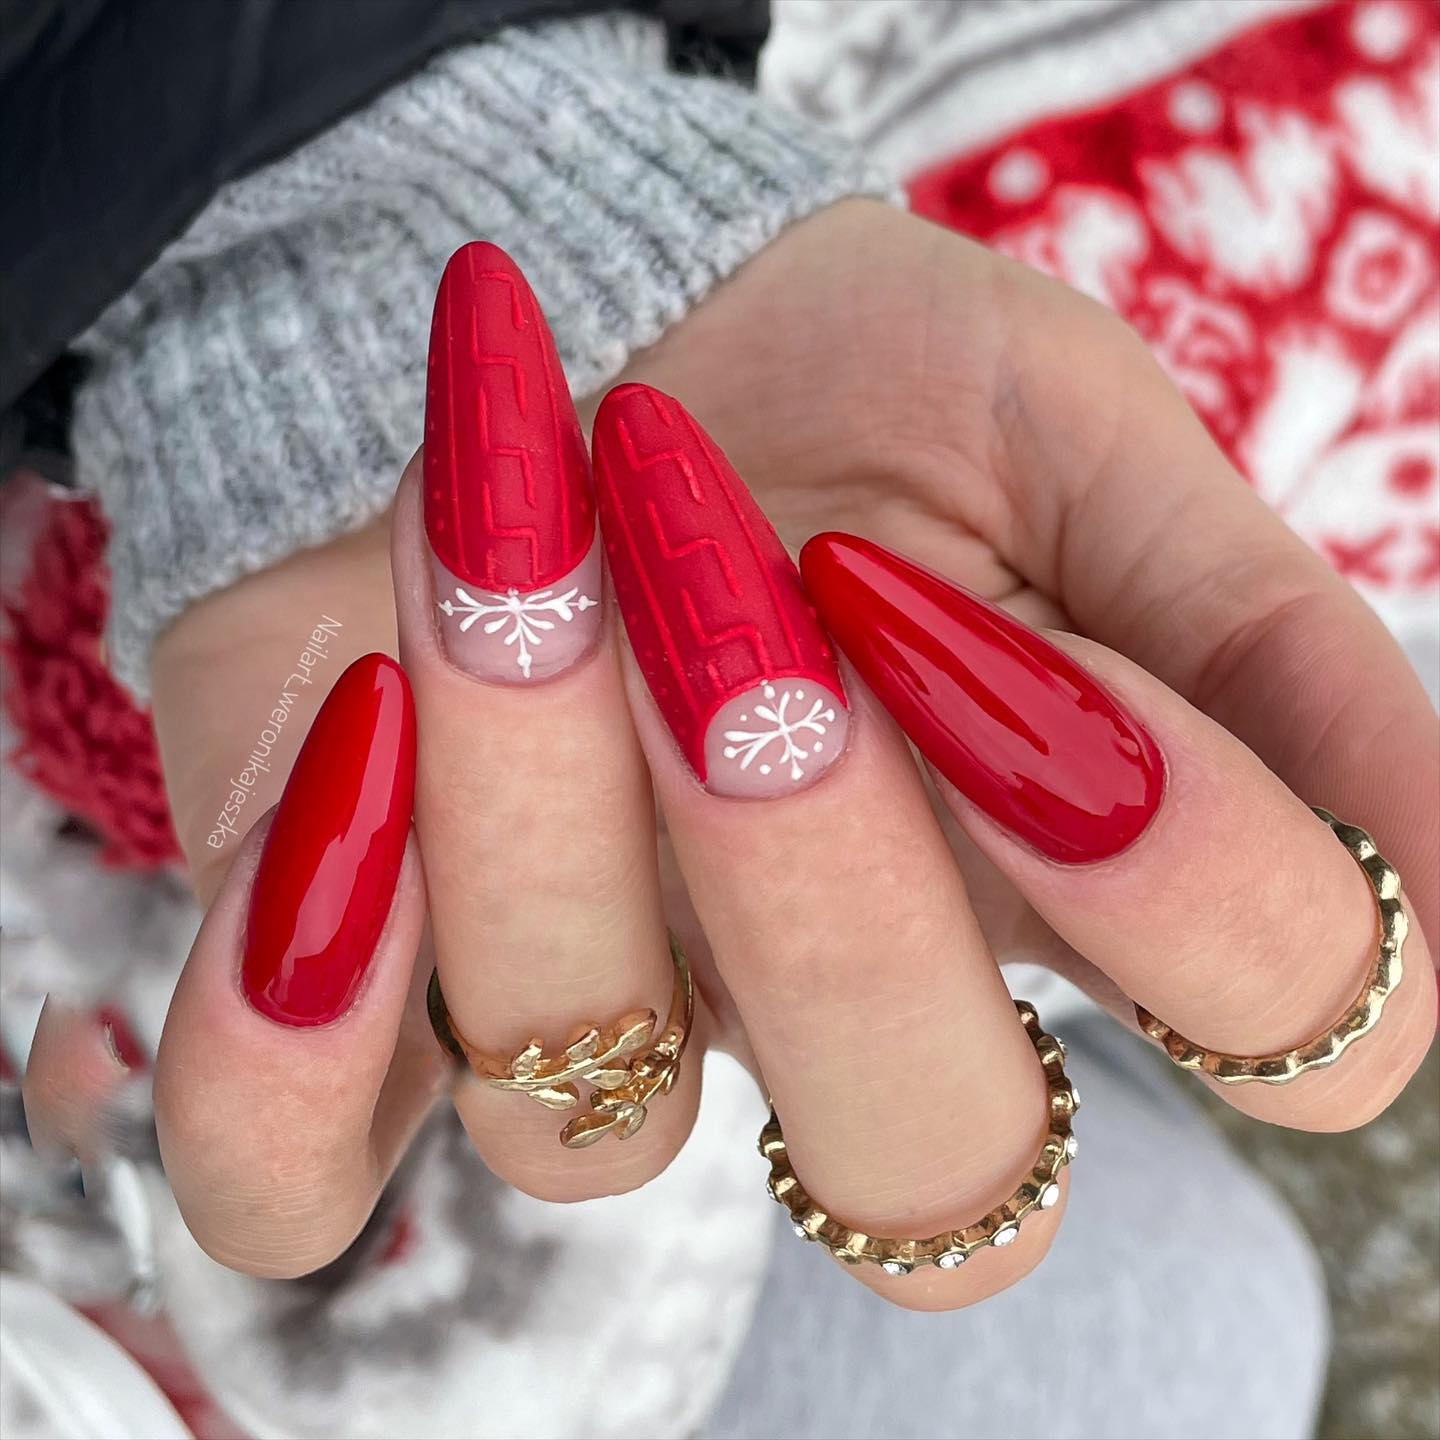 Long Red Nails with Sweater Design